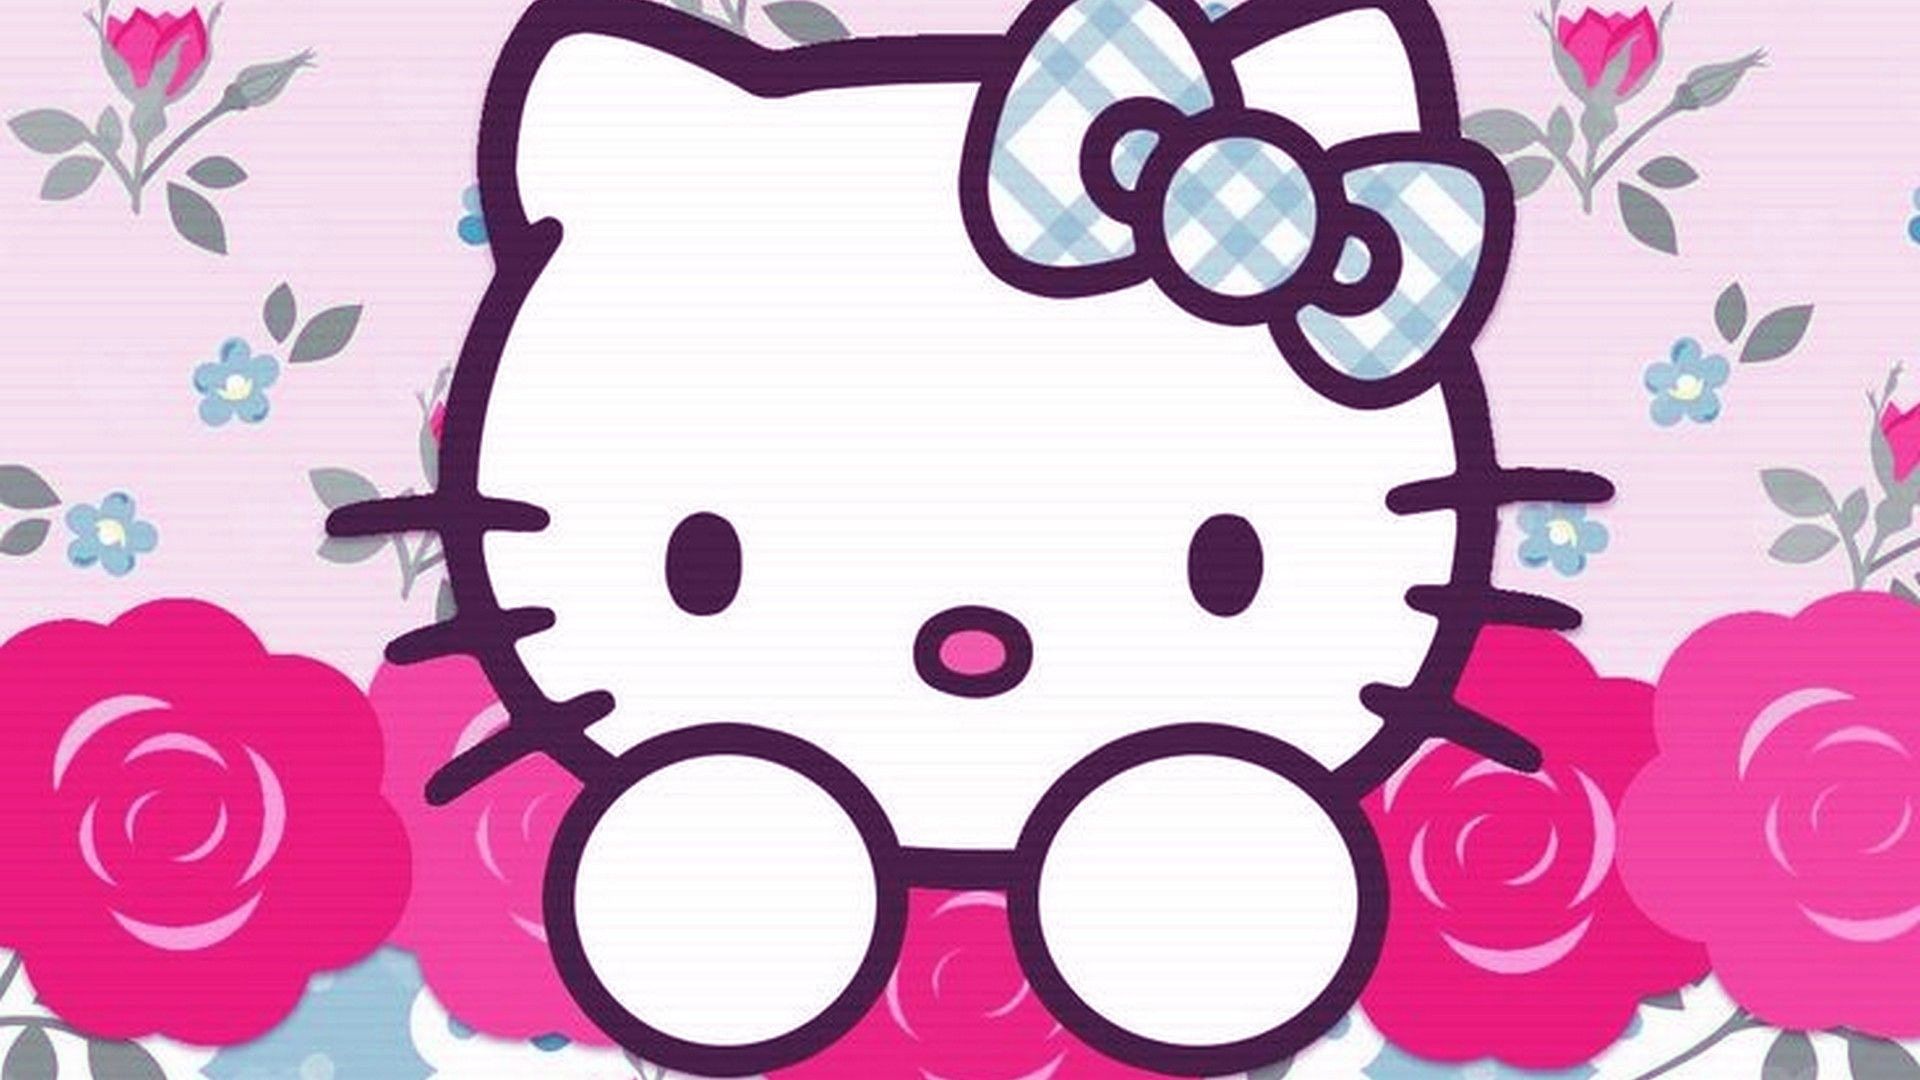 A hello kitty wallpaper with flowers - Hello Kitty